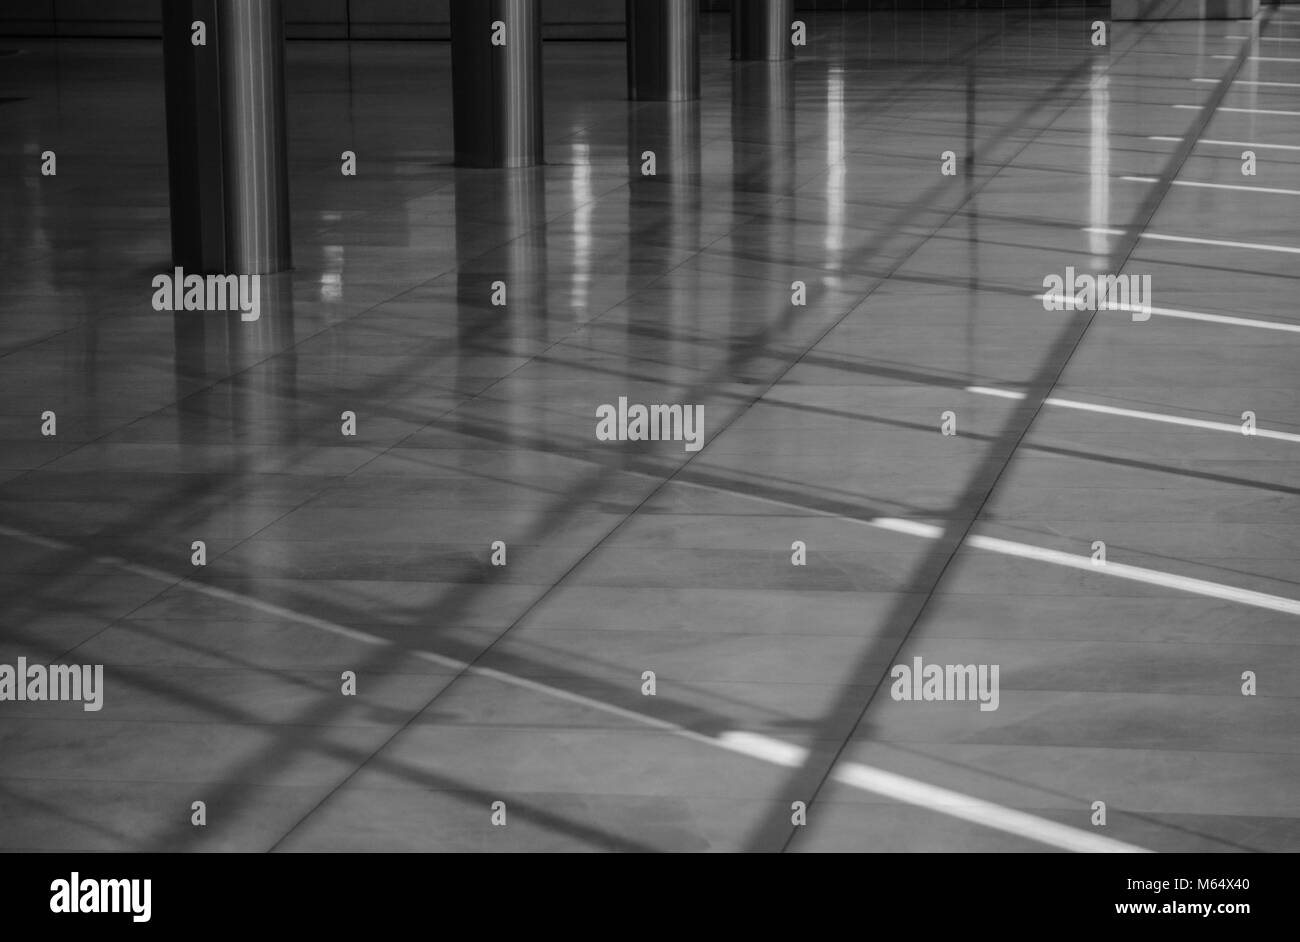 Abstract interior shot of pillars reflecting on a shiny floor in shades of grey monochrome Stock Photo